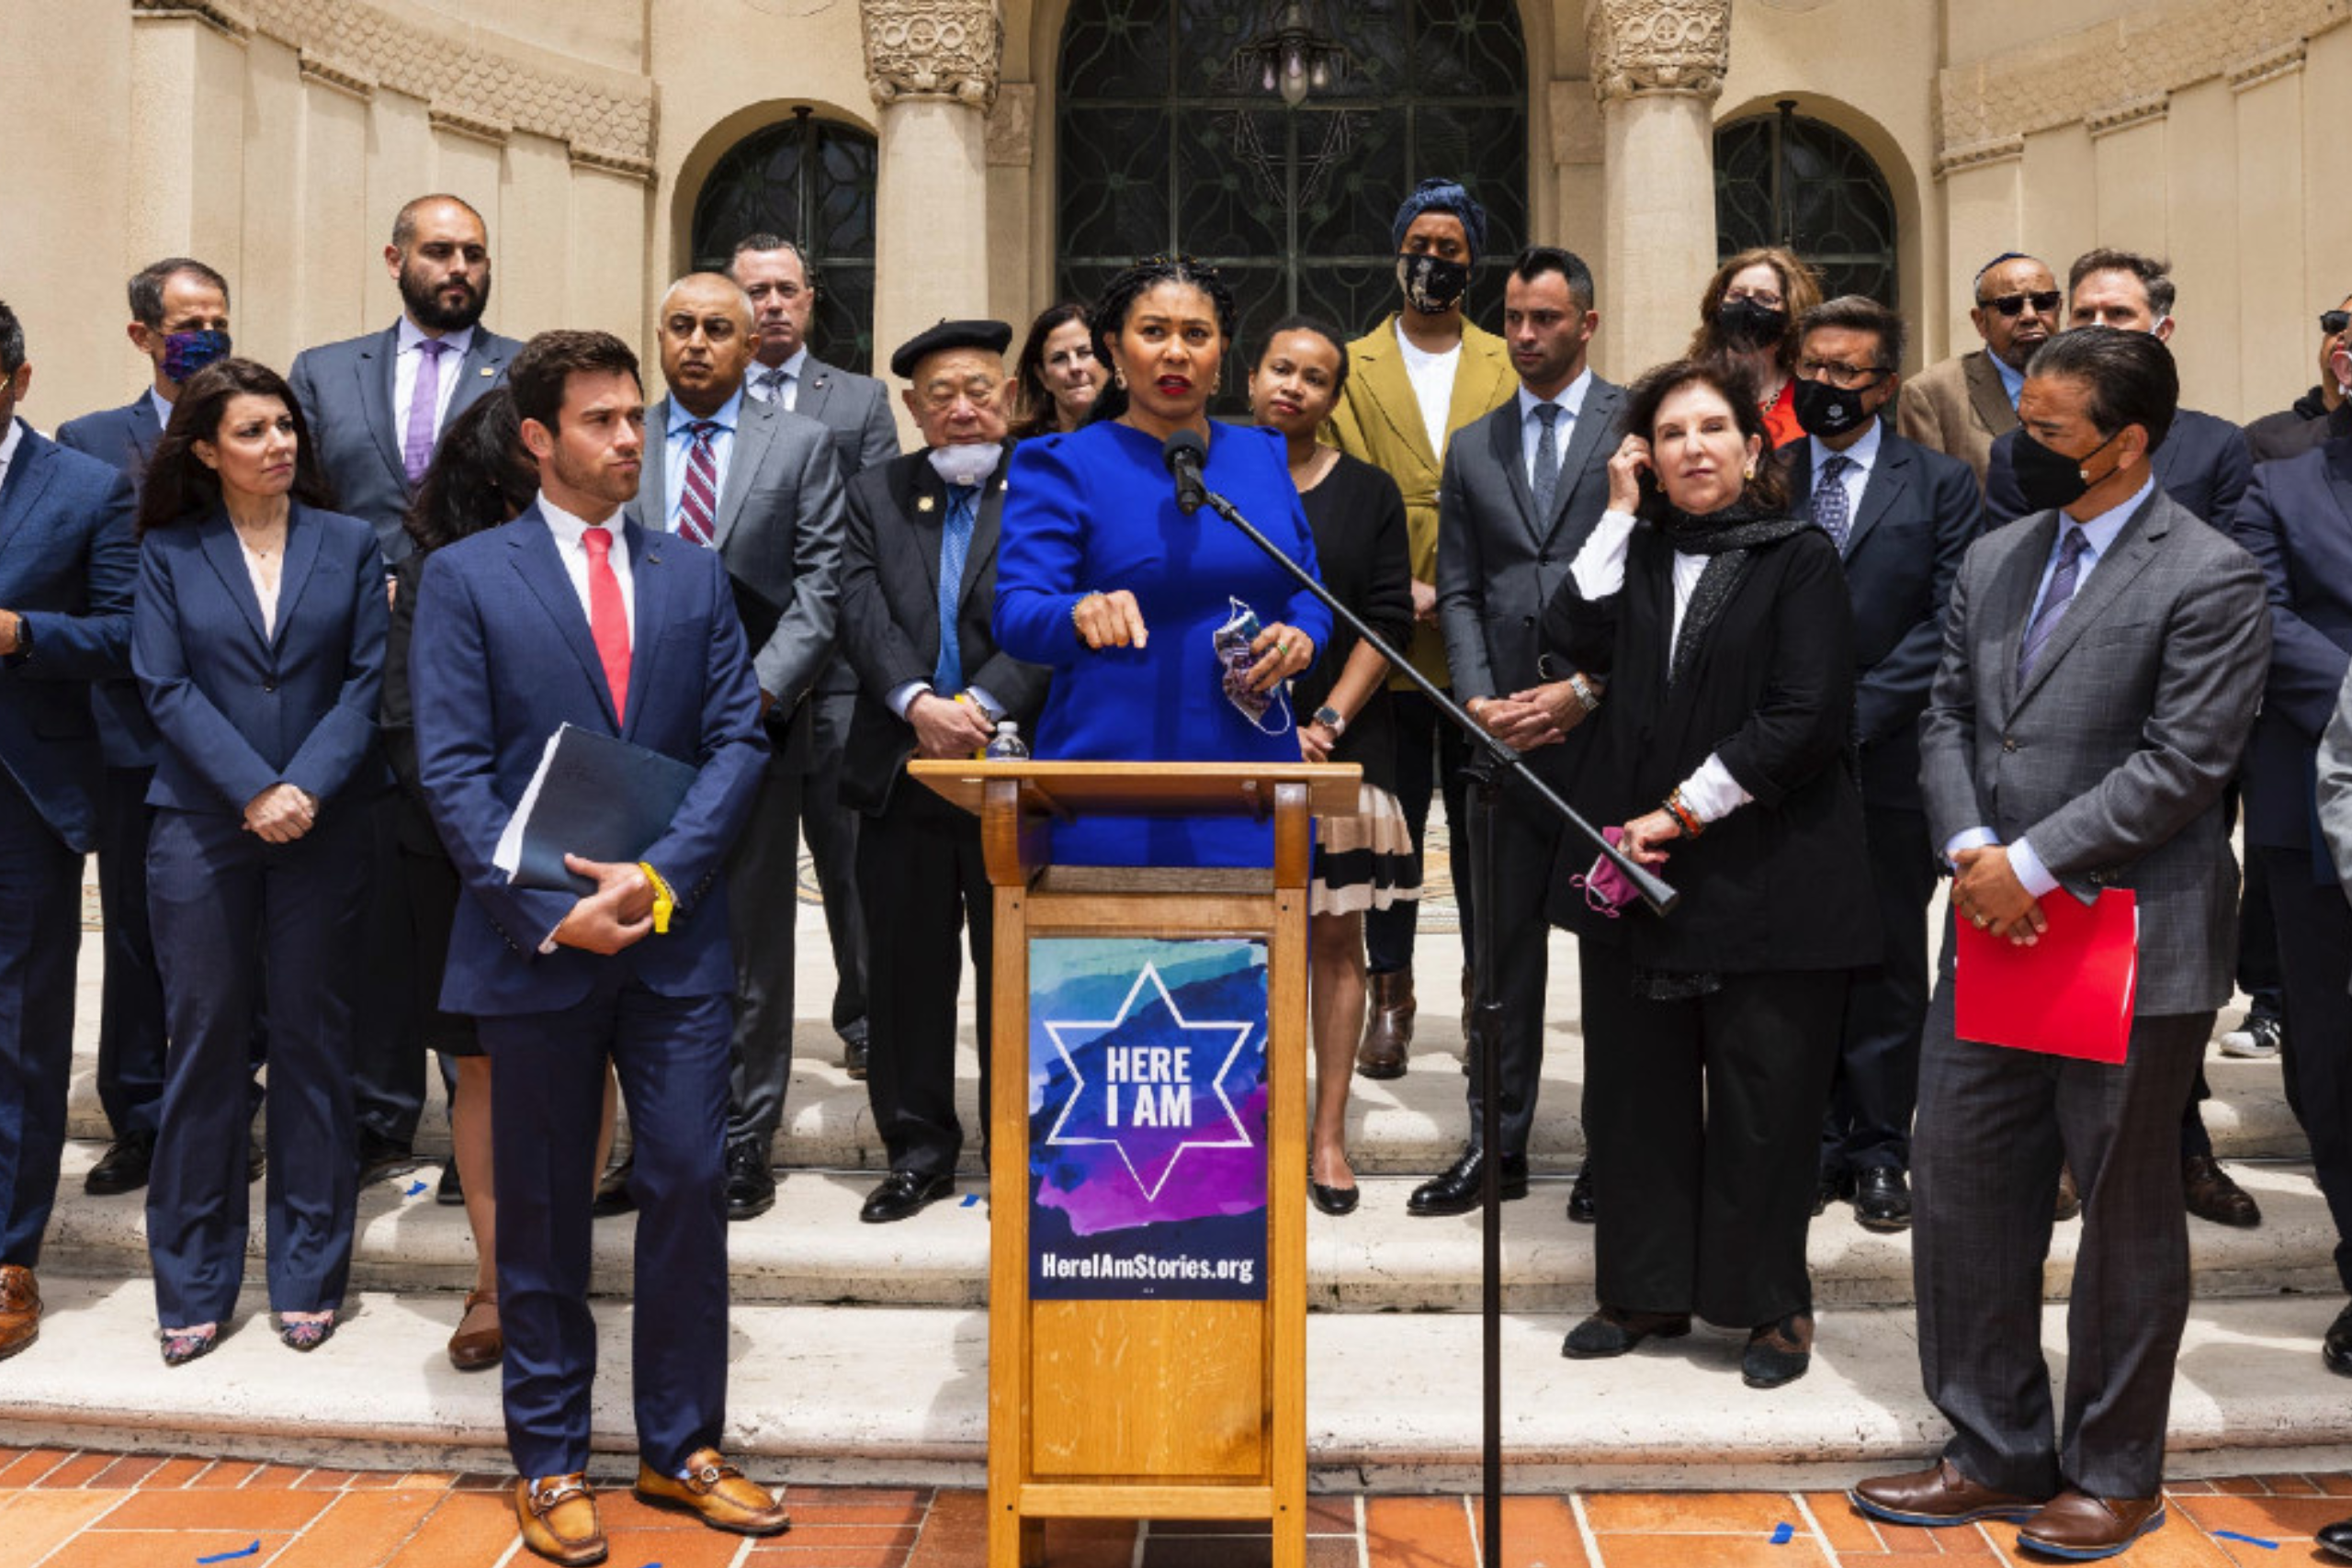 Here I Am press conference with SF Mayor London Breed